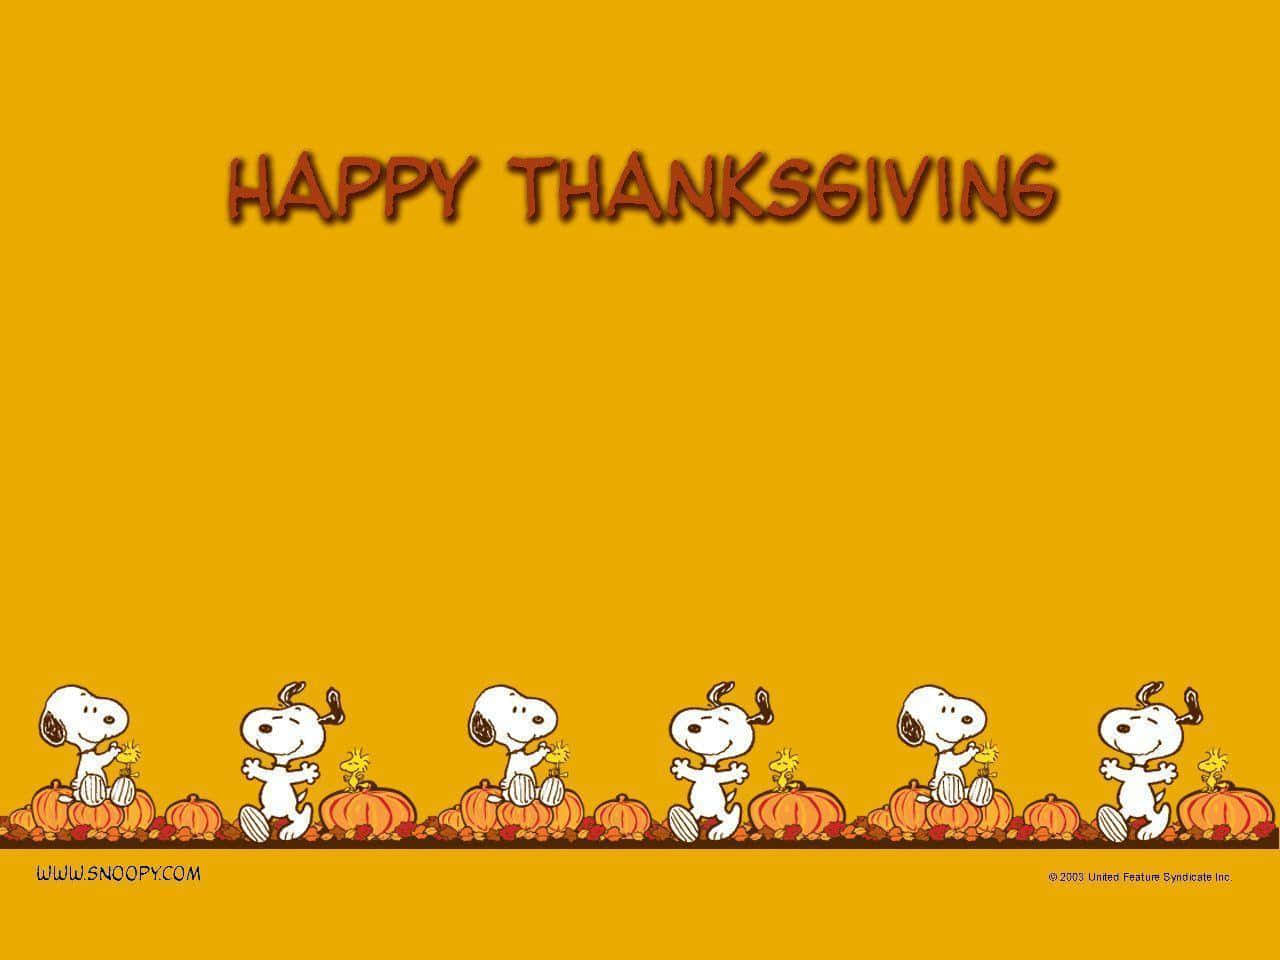 Celebrate Thanksgiving with Snoopy! Wallpaper